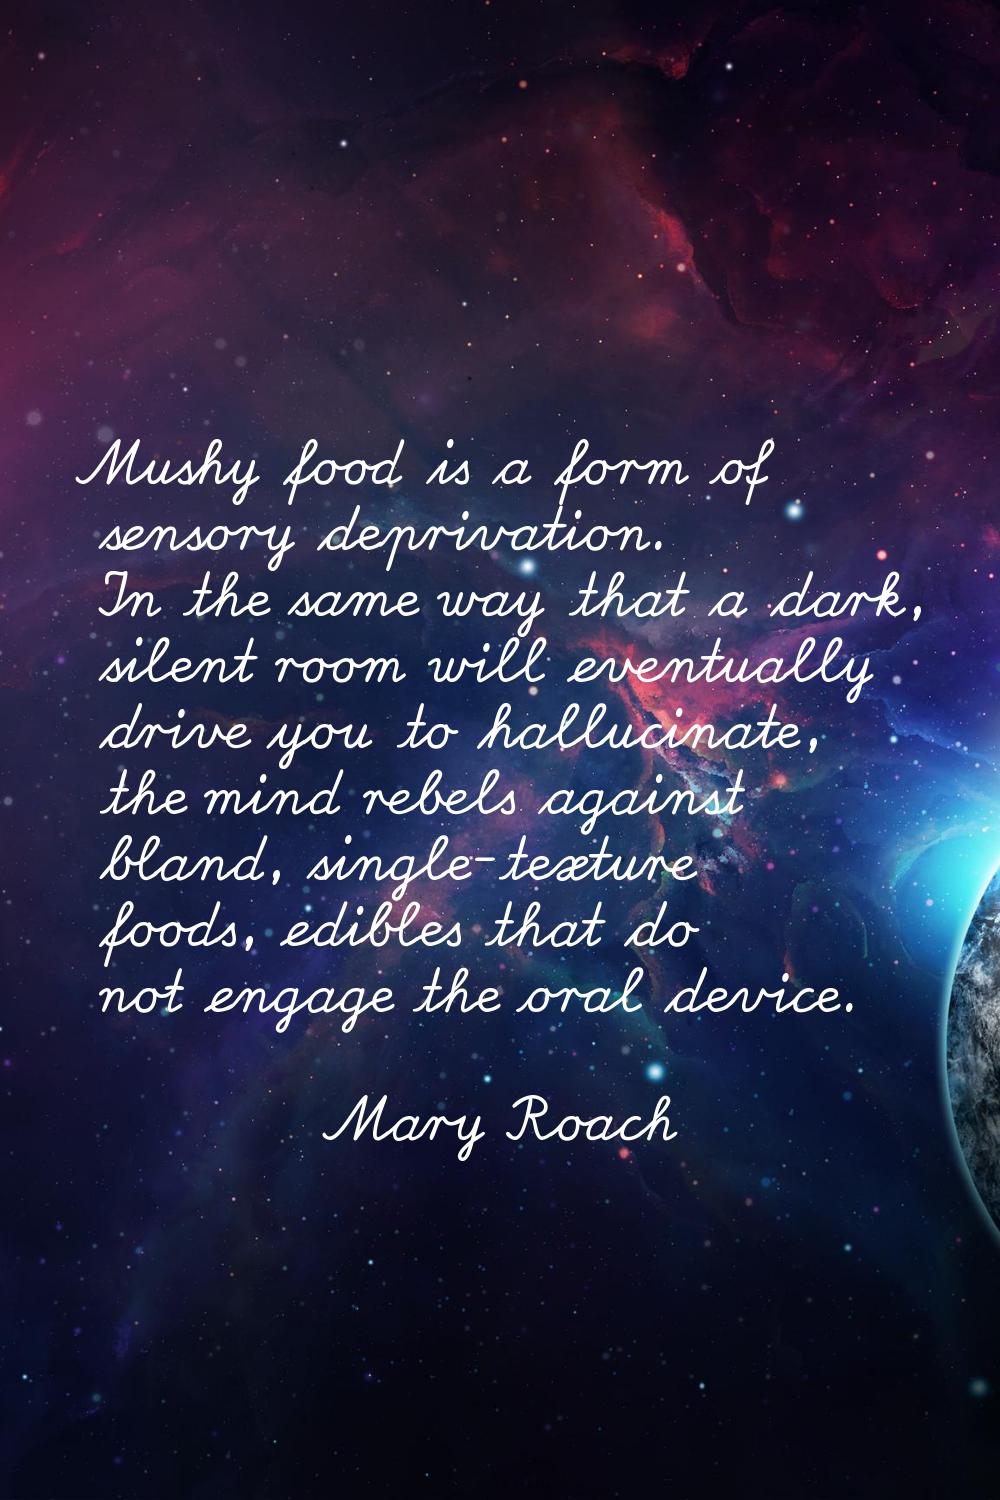 Mushy food is a form of sensory deprivation. In the same way that a dark, silent room will eventual